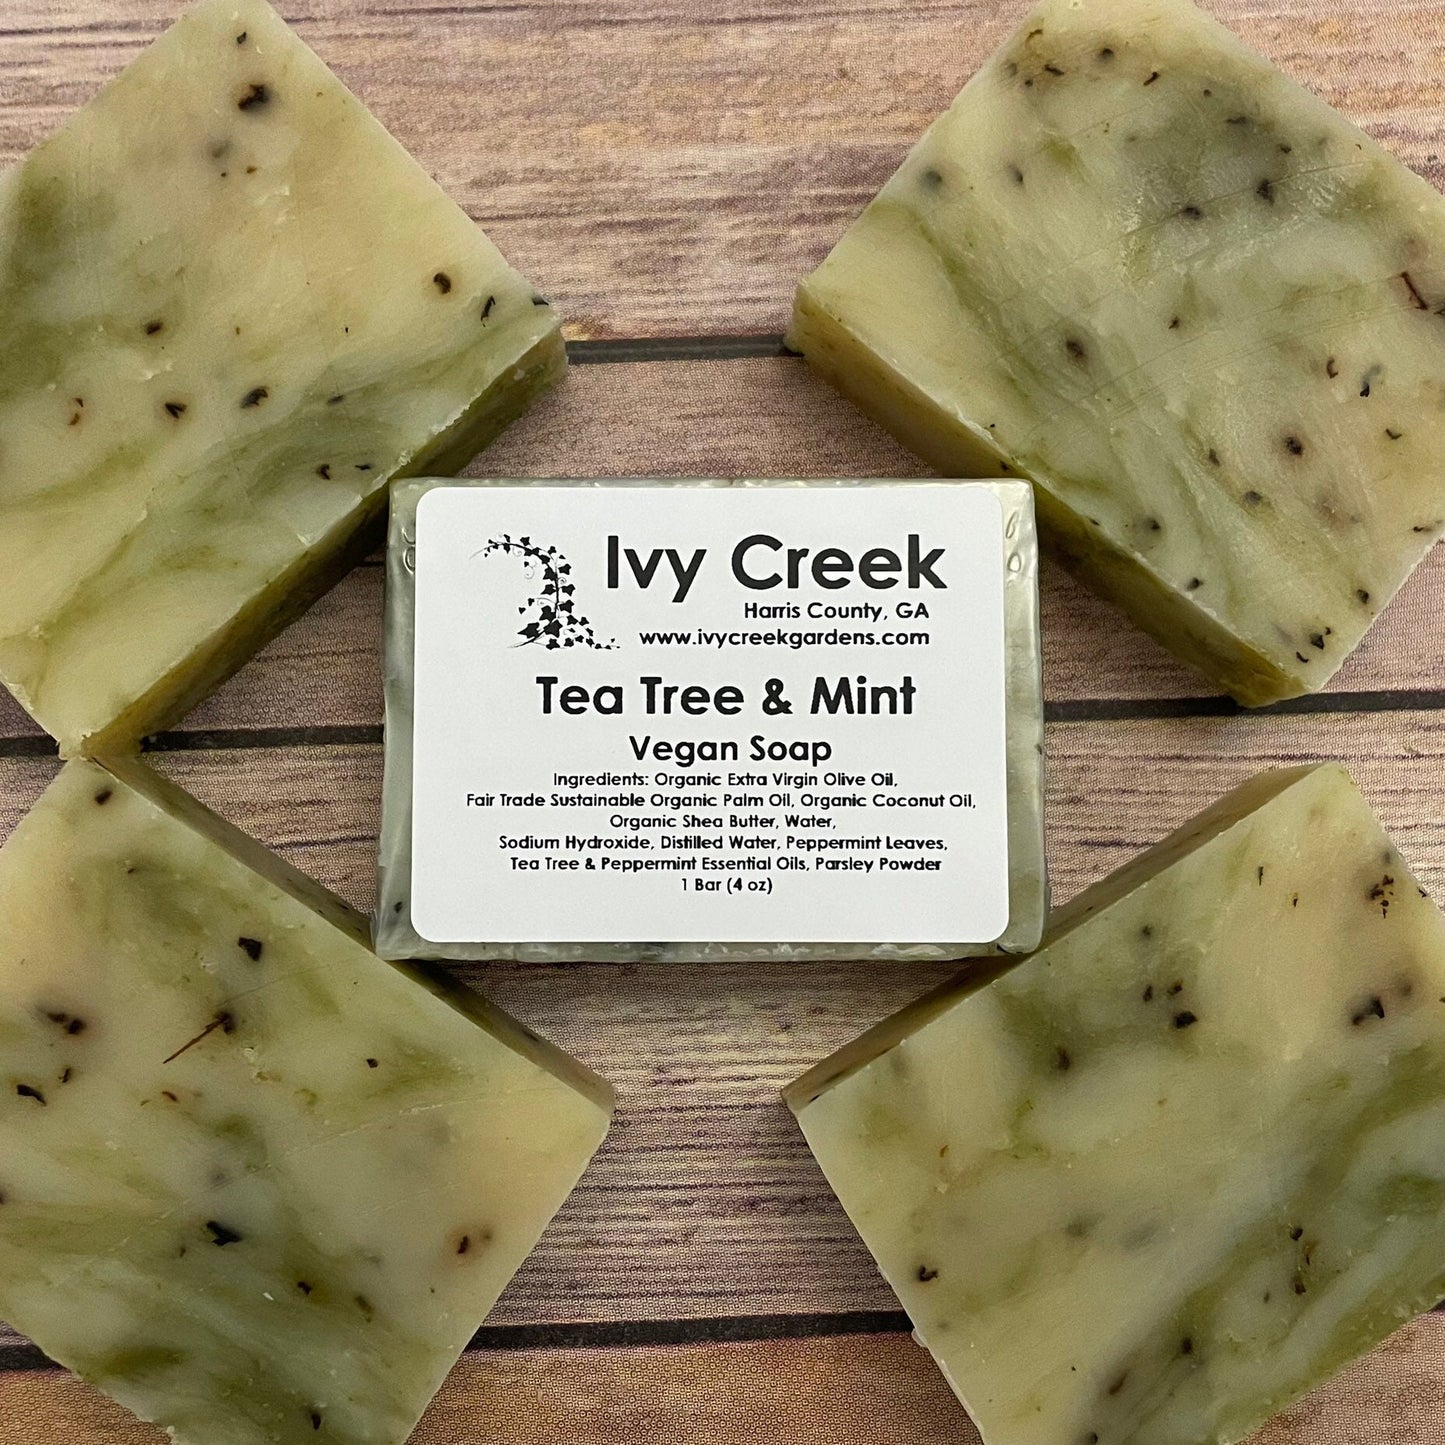 Ivy Creek Tea Tree & Mint Vegan Soap | Invigorating and Nourishing | Natural Soap Infused with Tea Tree and Peppermint Essential Oils | 4 oz